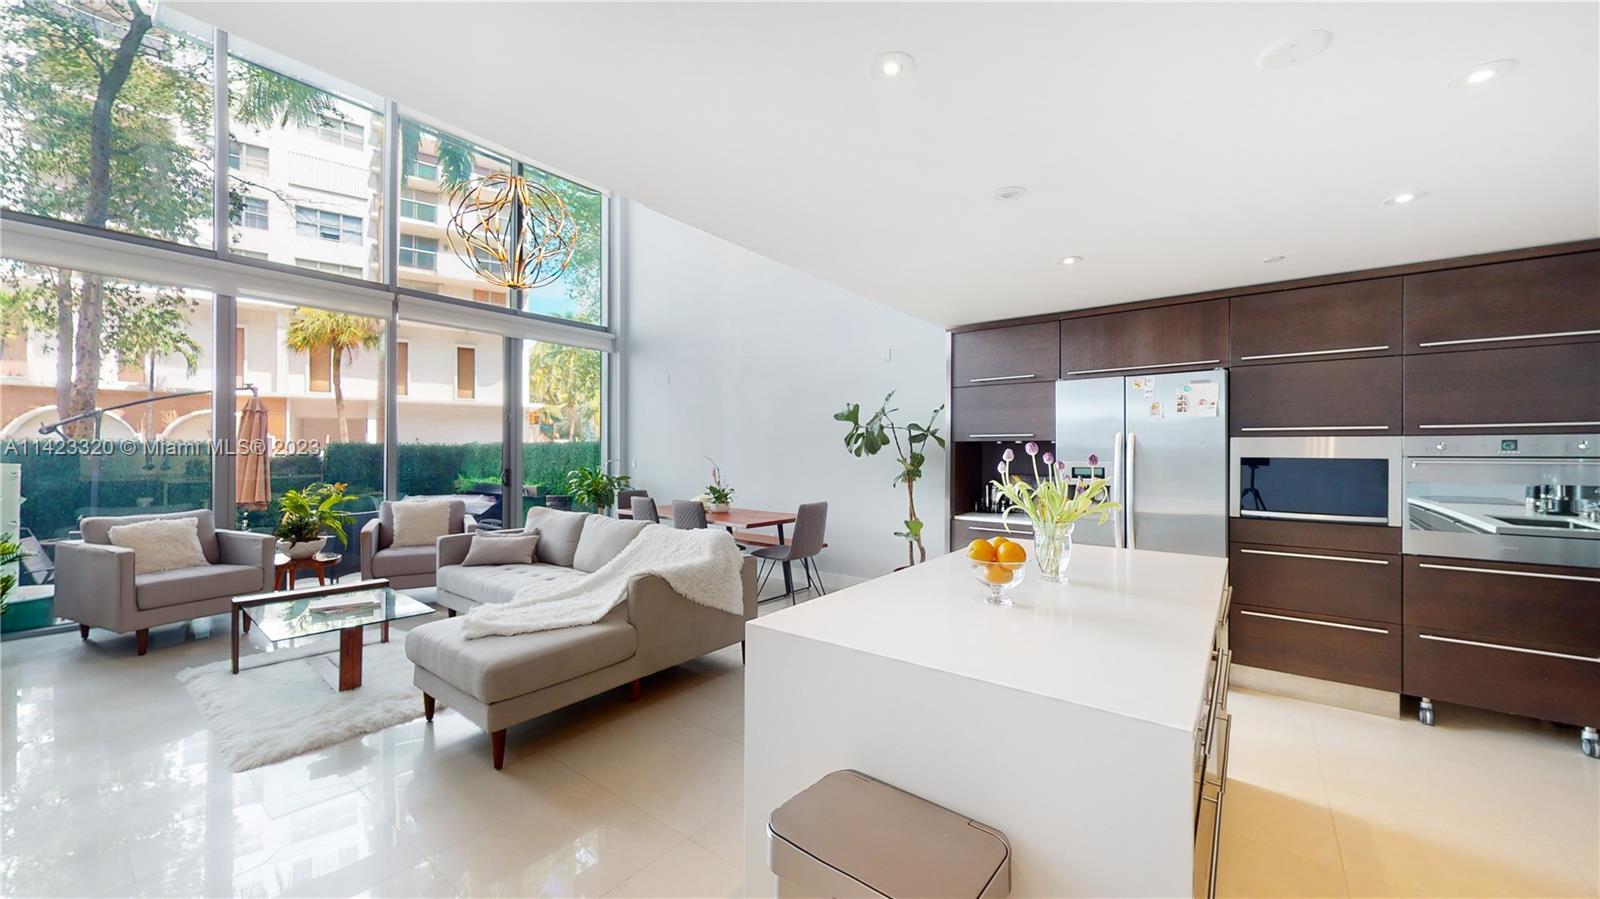 Turnkey luxurious remodeled condo, unique amongst it's kind. Featuring 2 Bedrooms + Den (converted t